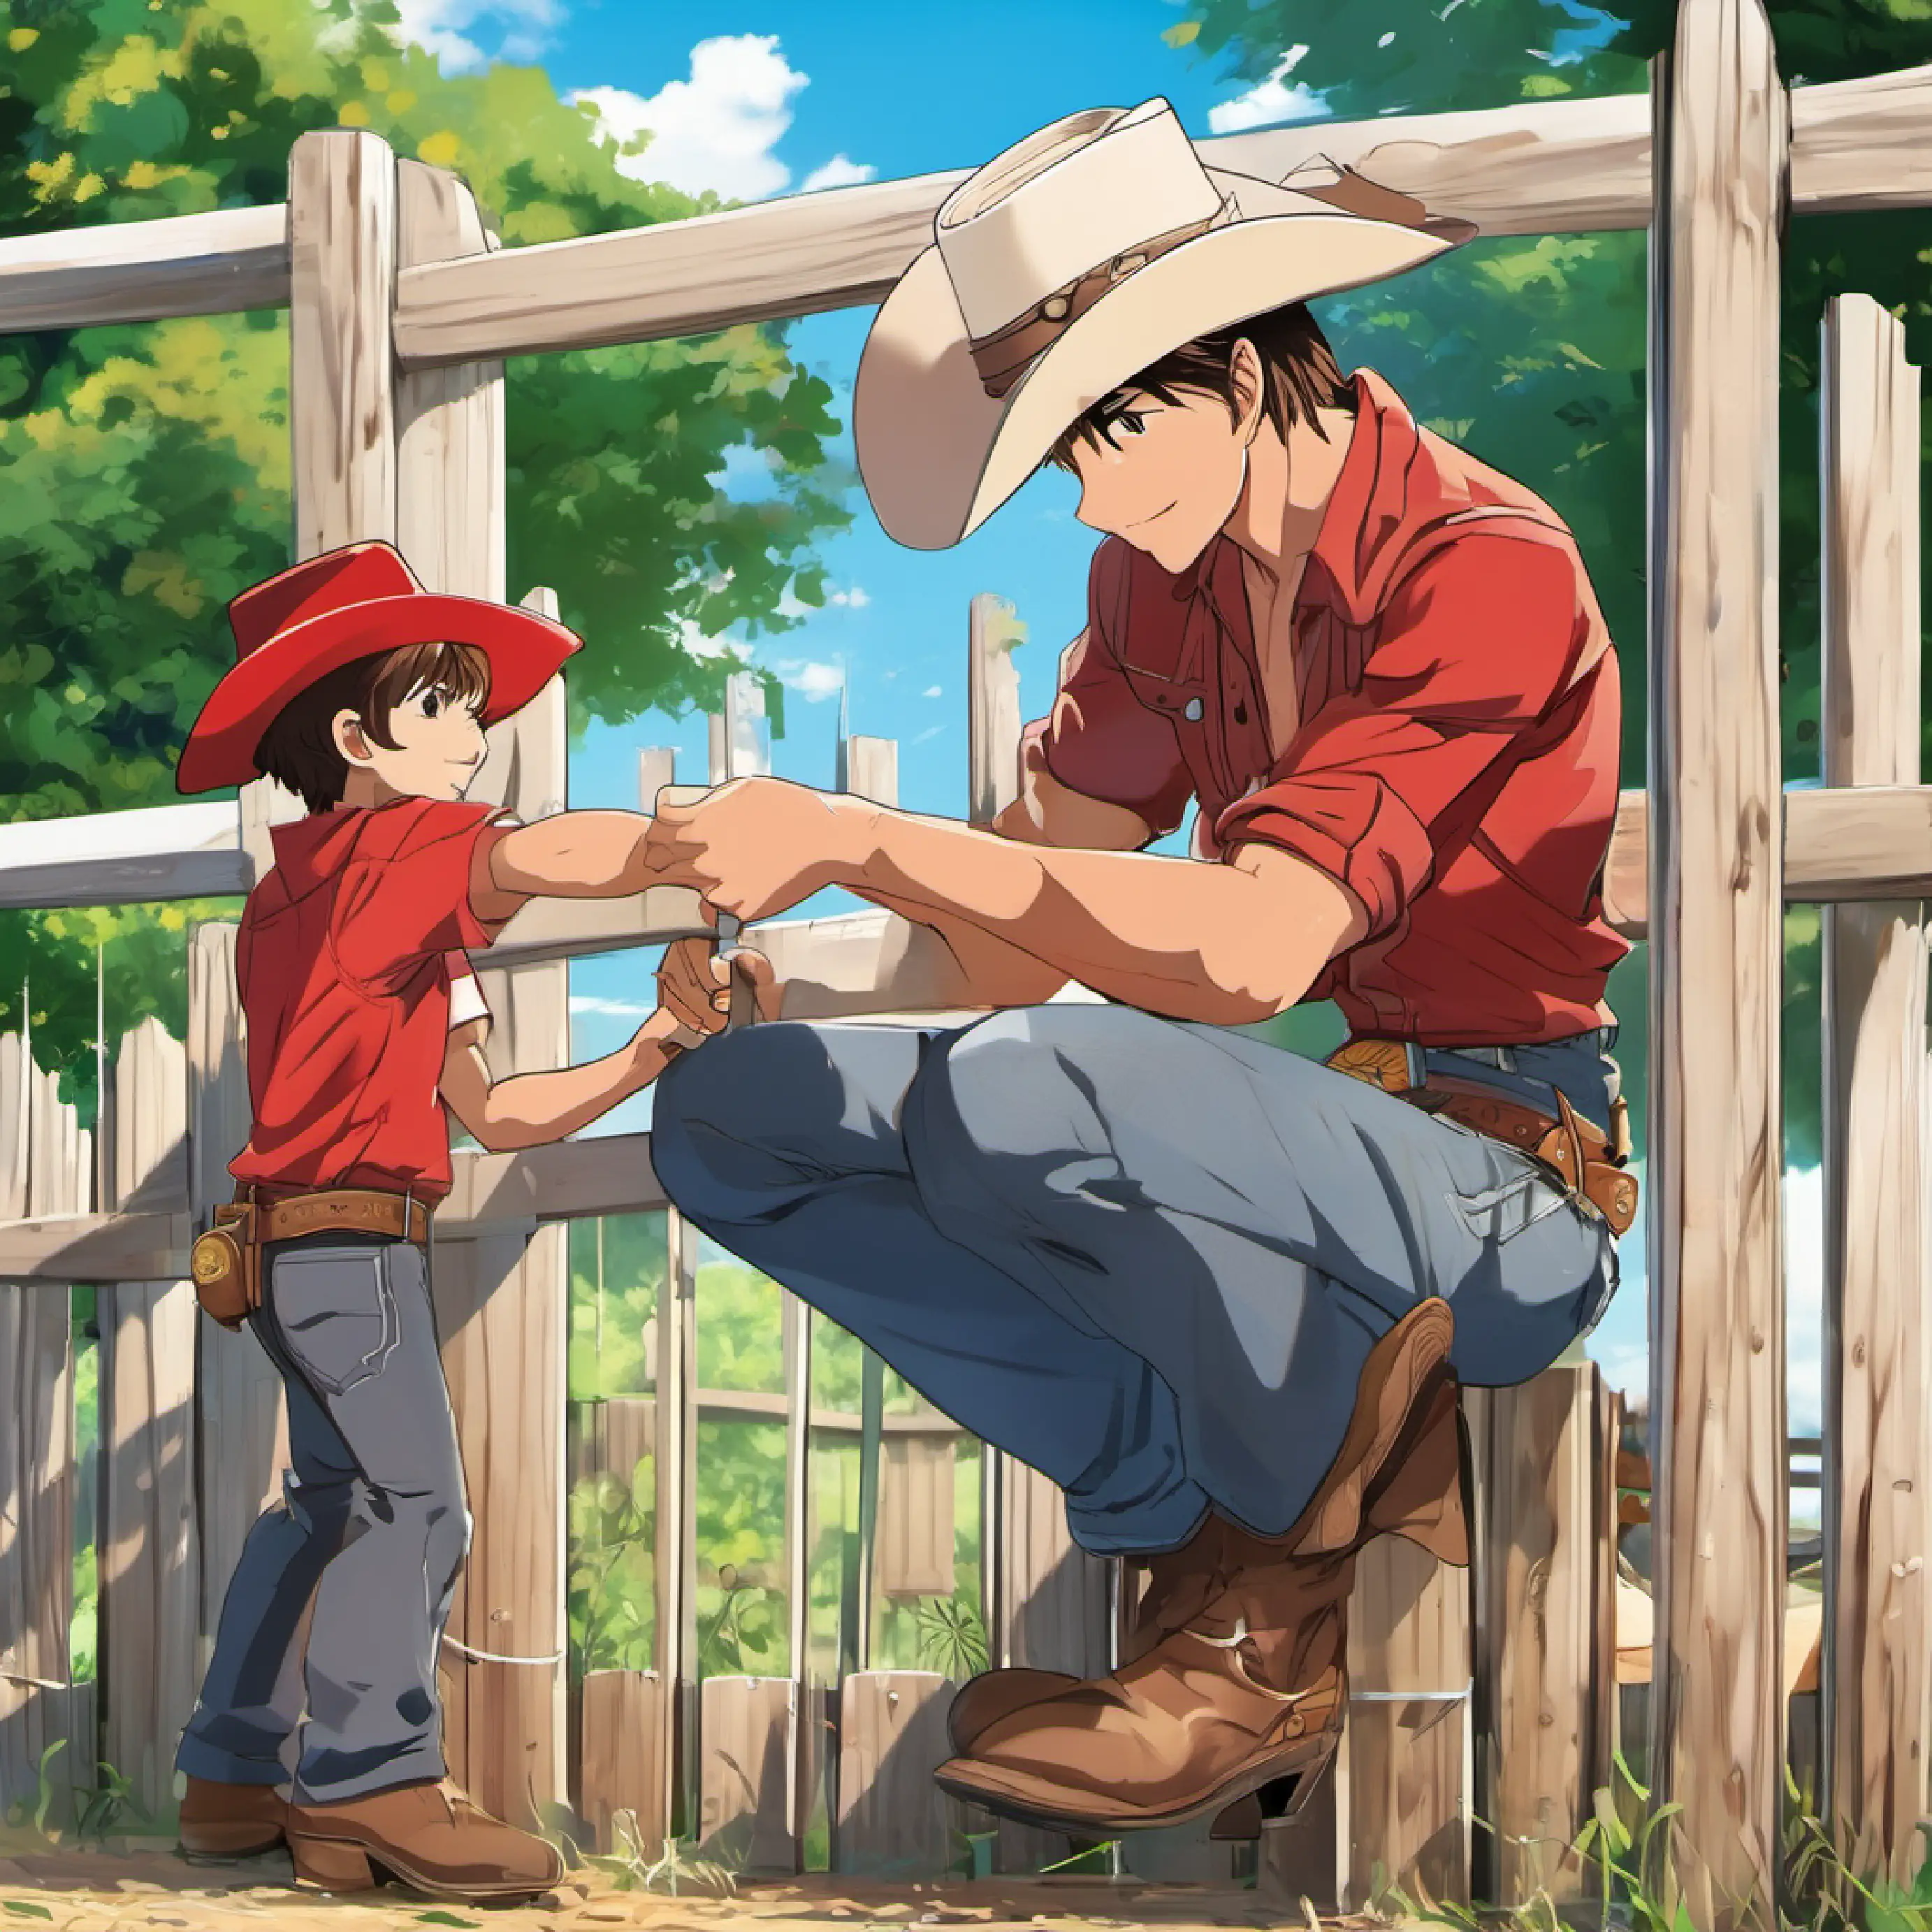 Tommy and his dad fixing the fence, with Tommy counting out nails.